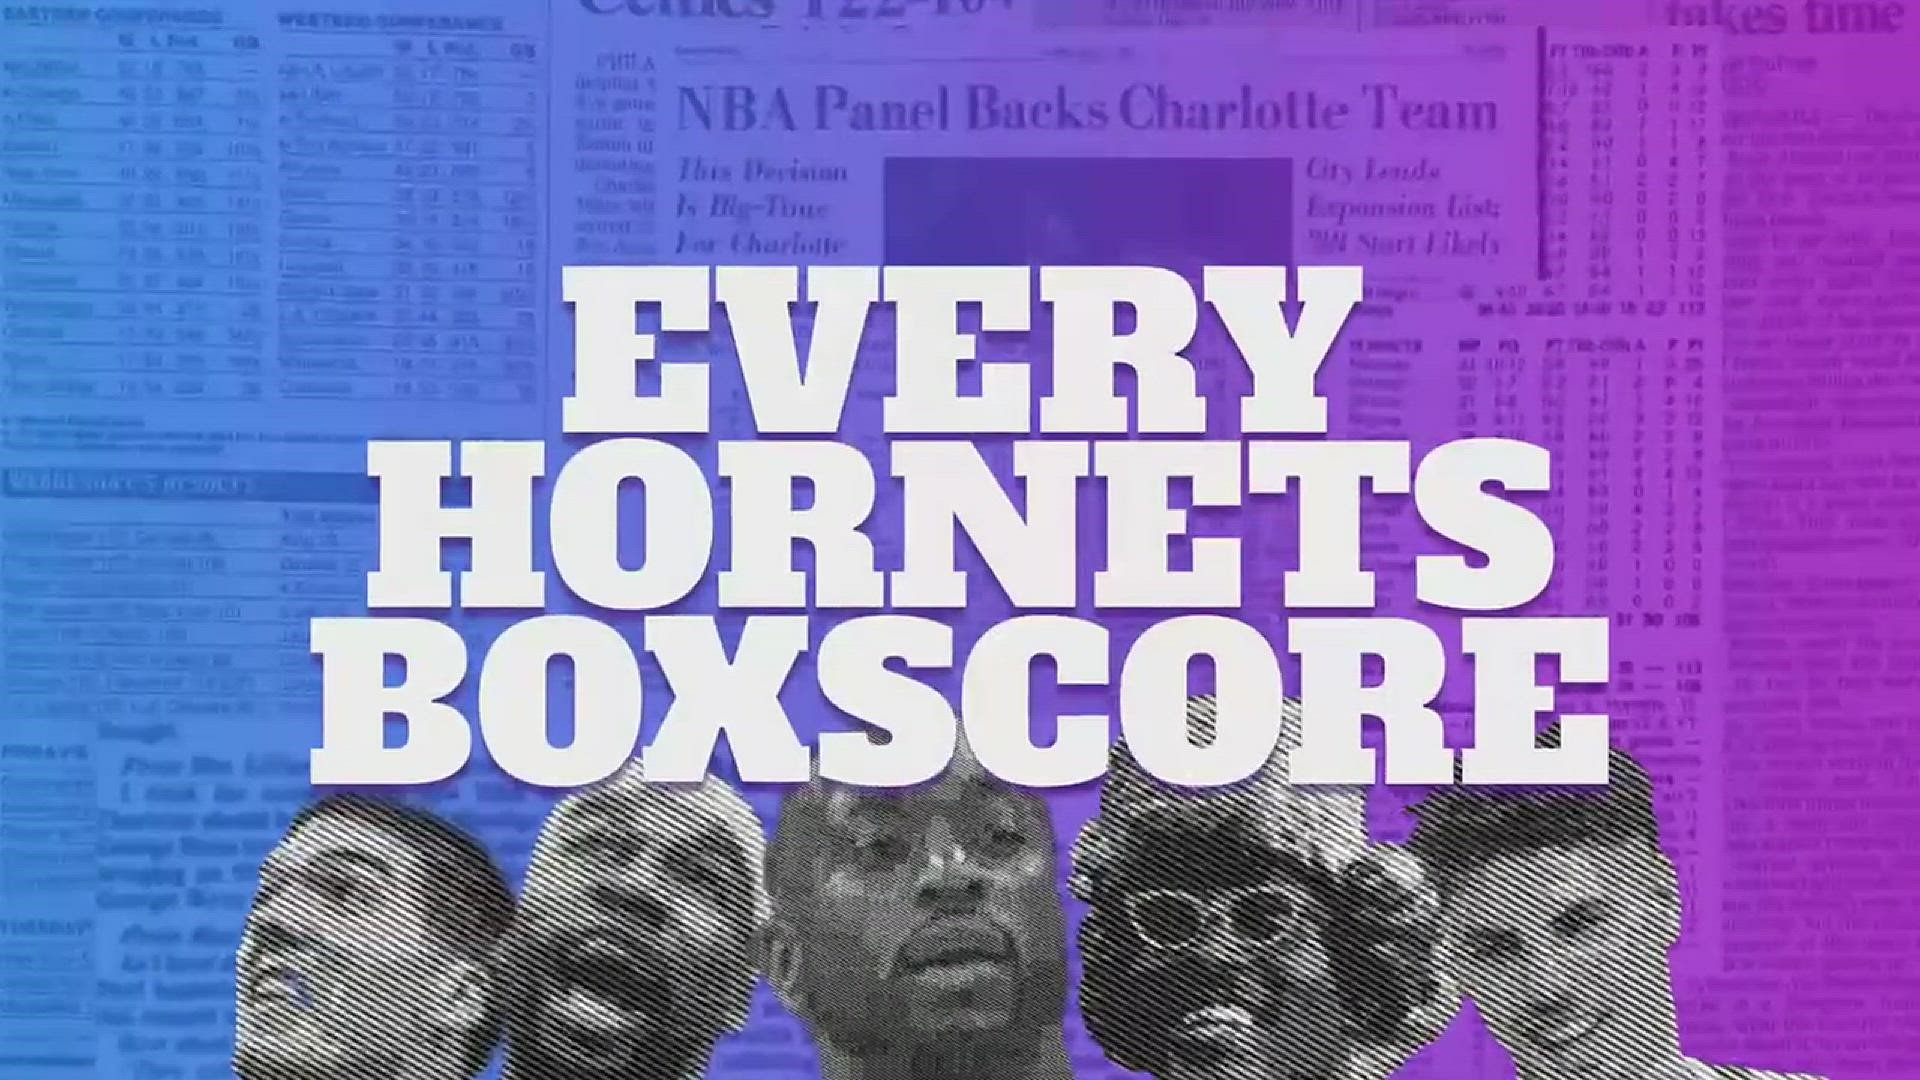 Our random boxscore generator, the Bees Machines, delivers an absolute rare gem of an NBA contest.